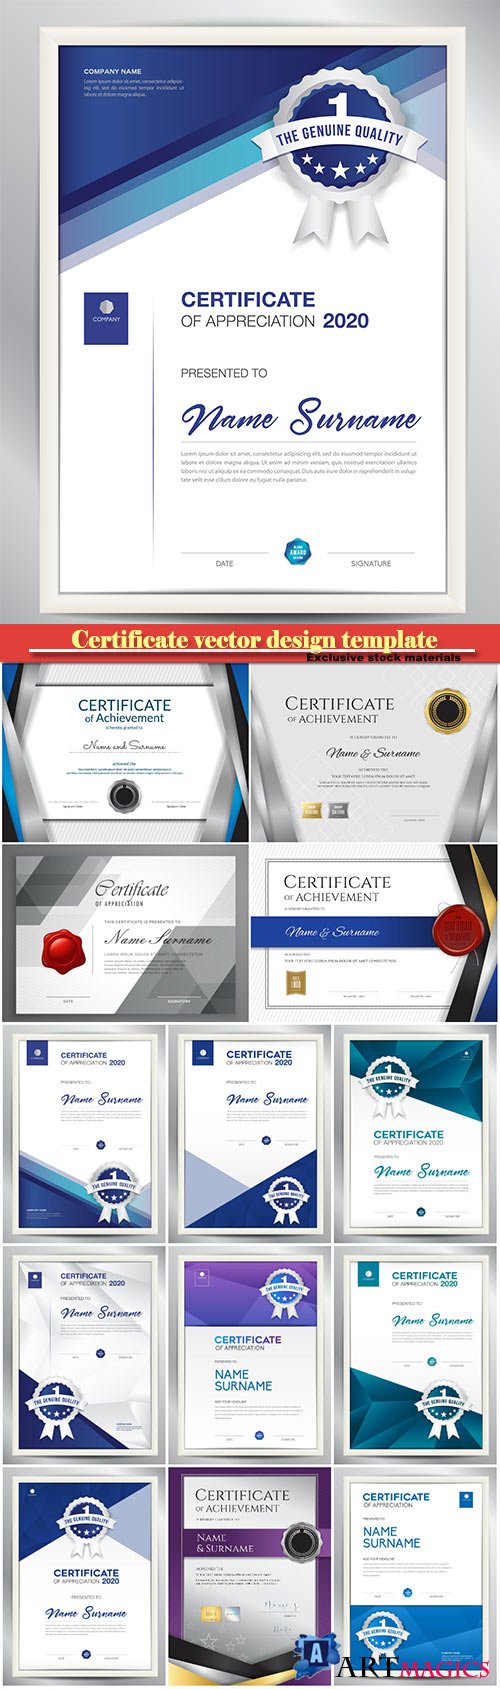 Certificate and vector diploma design template # 41